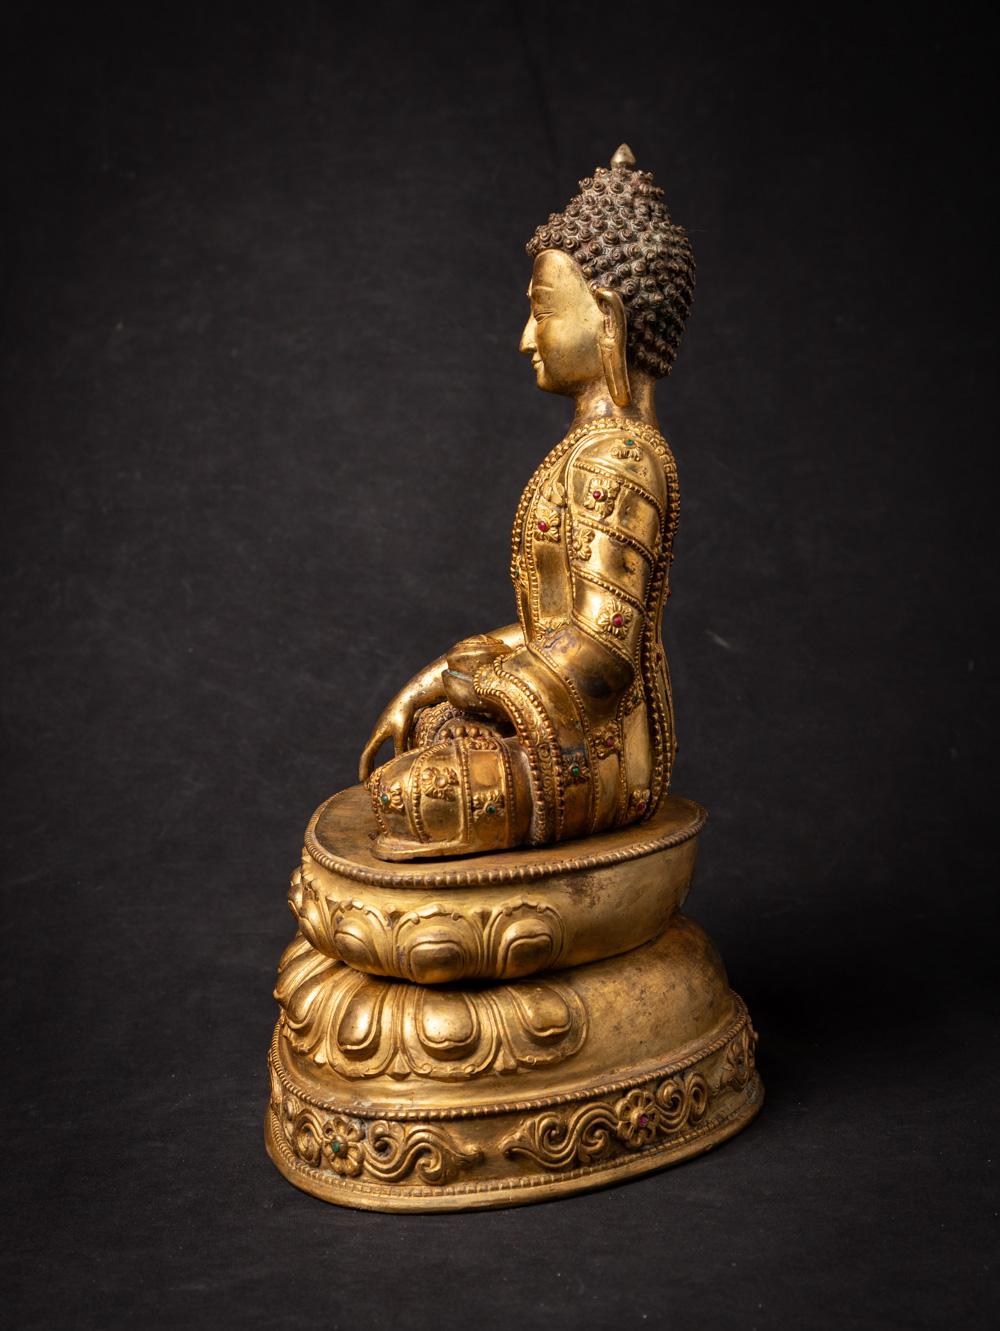 Nepalese Mid-20th century old bronze Nepali Buddha statue i20.5nlaid with real gem stones